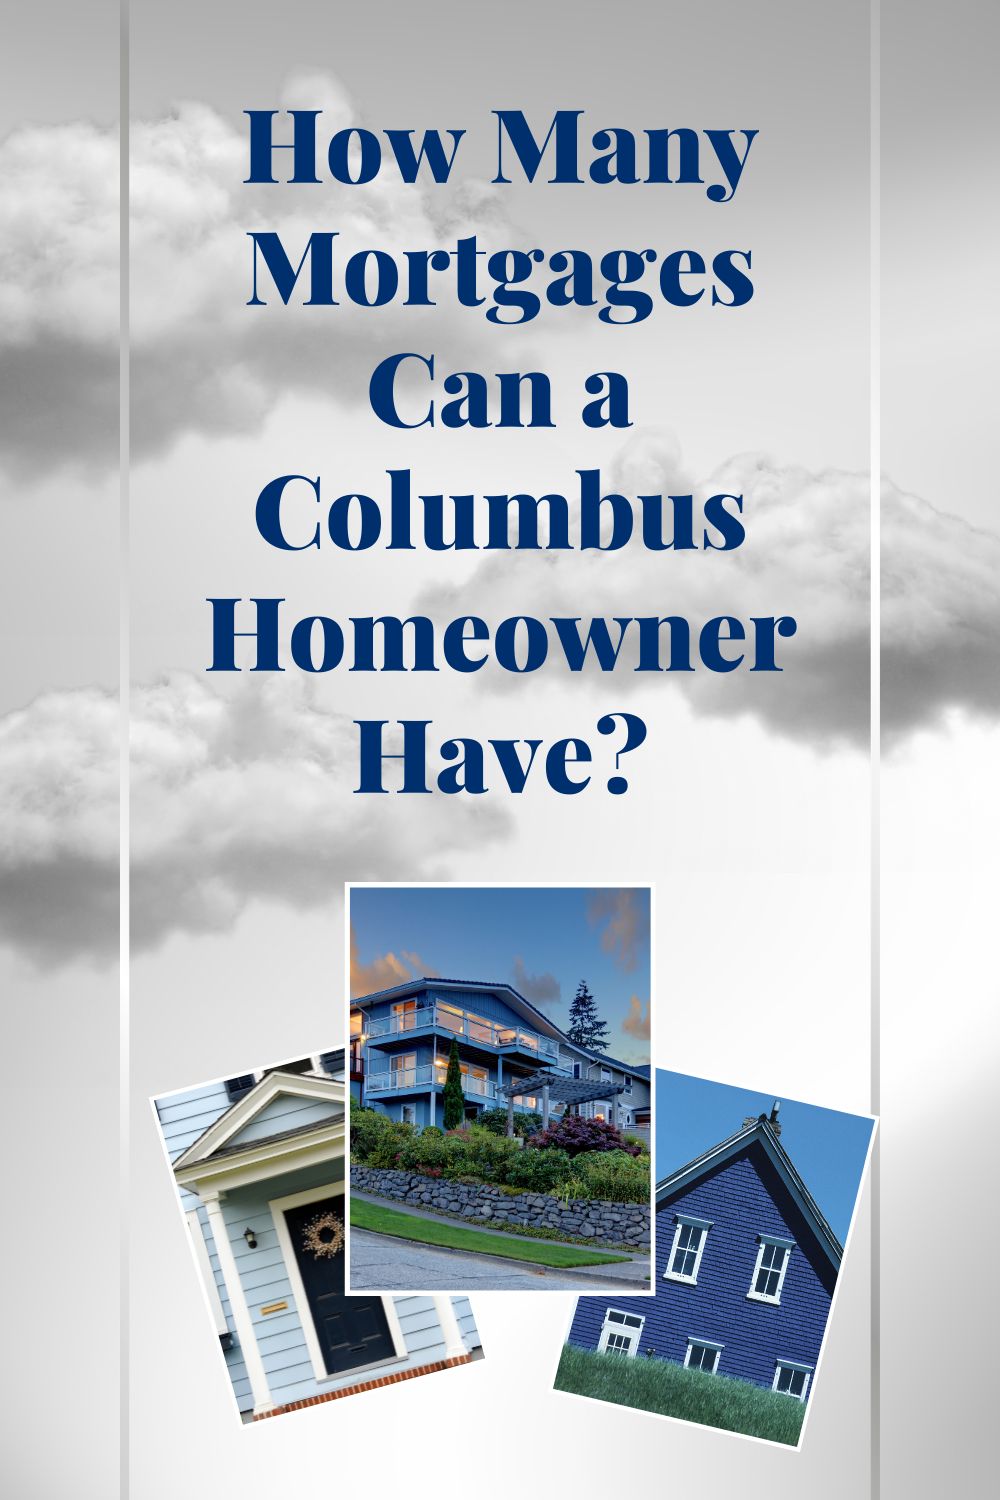 How Many Mortgages Can a Columbus Homeowner Have?